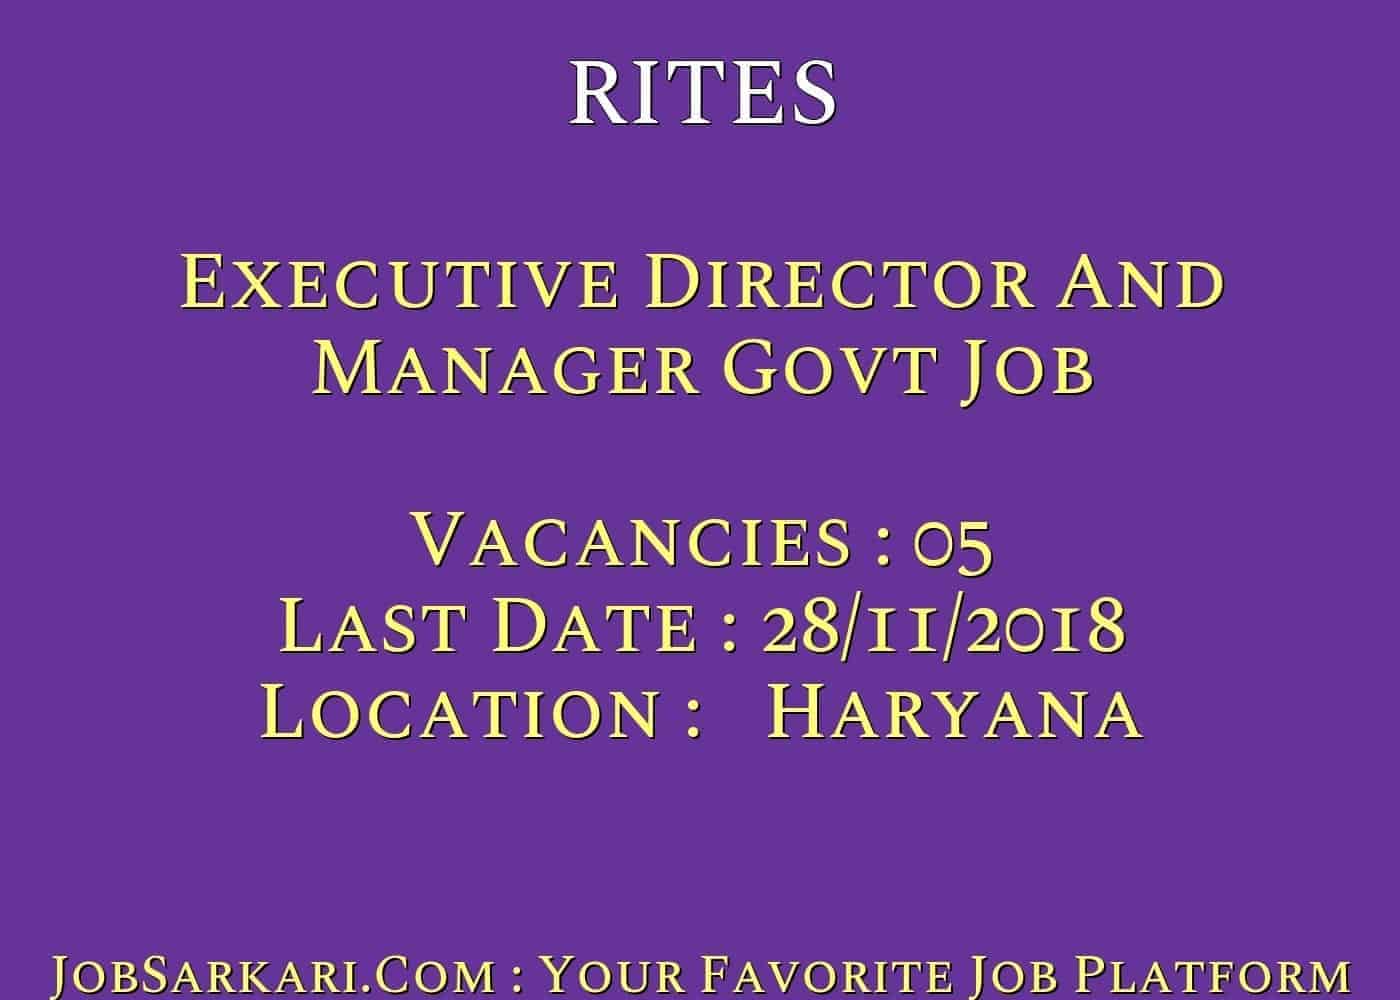 RITES Recruitment 2018 For Executive Director And Manager Govt Job